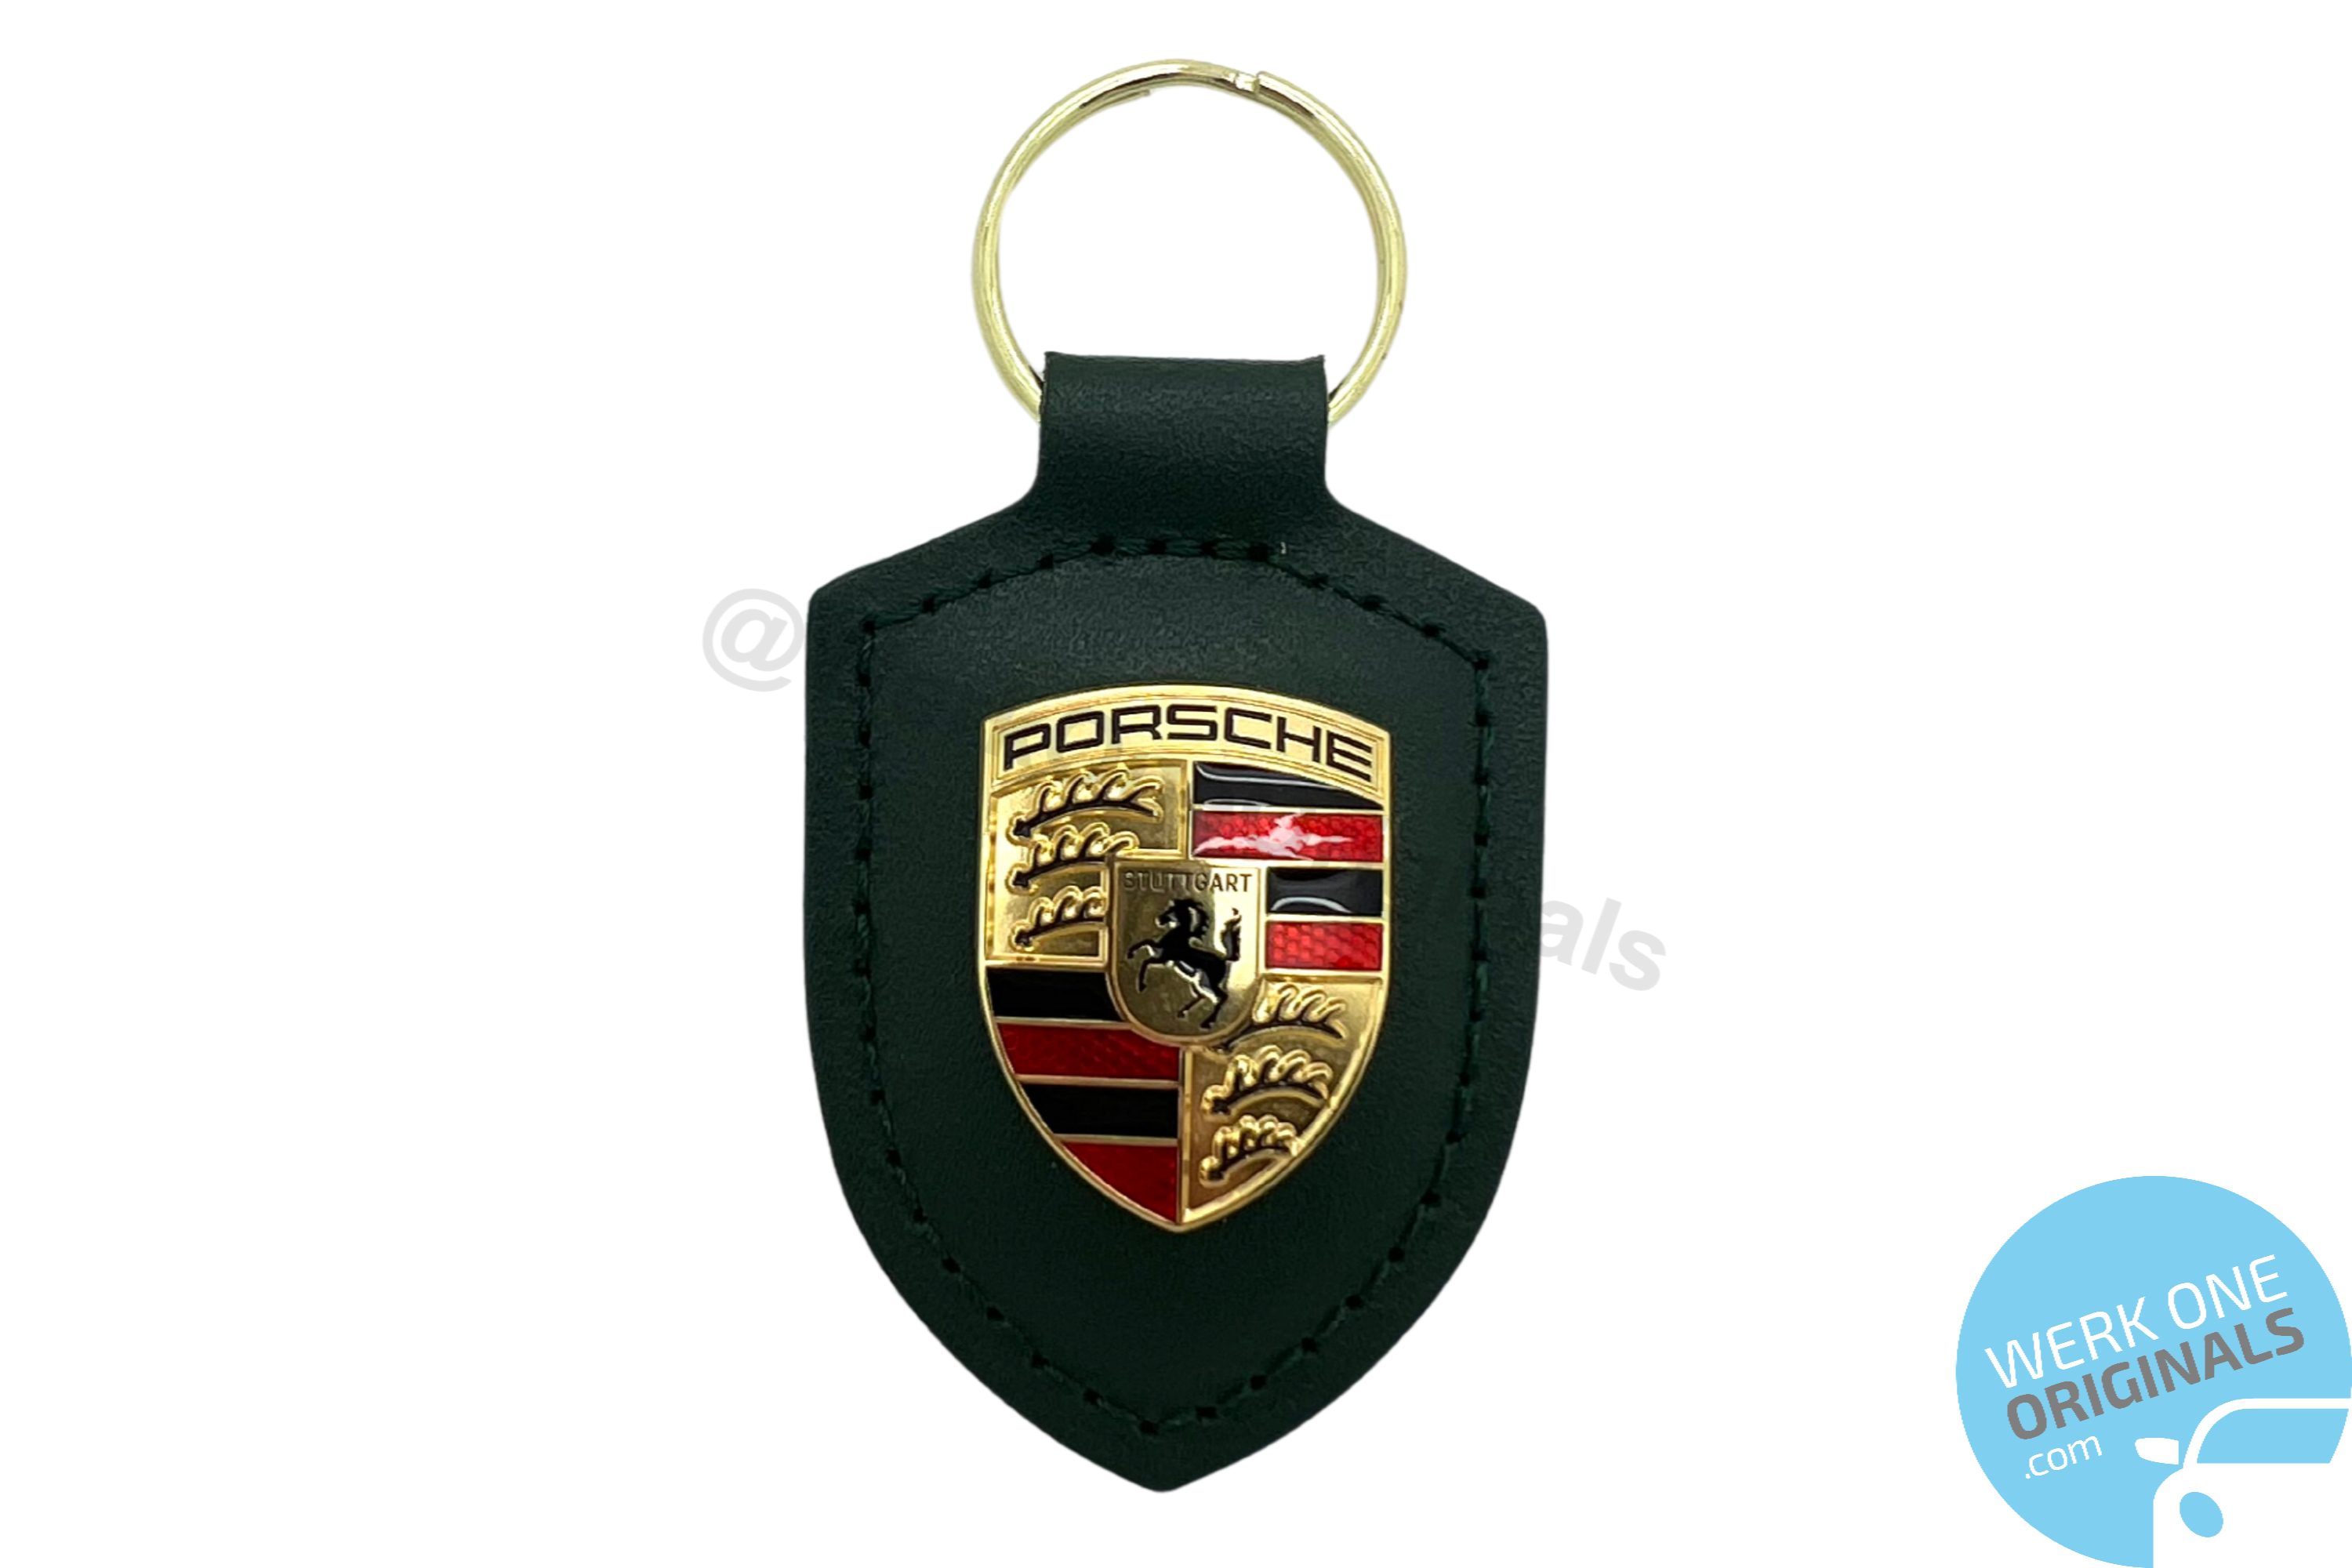 Porsche Official 75 Years Anniversary Limited Edition Key Fob in Irish Green